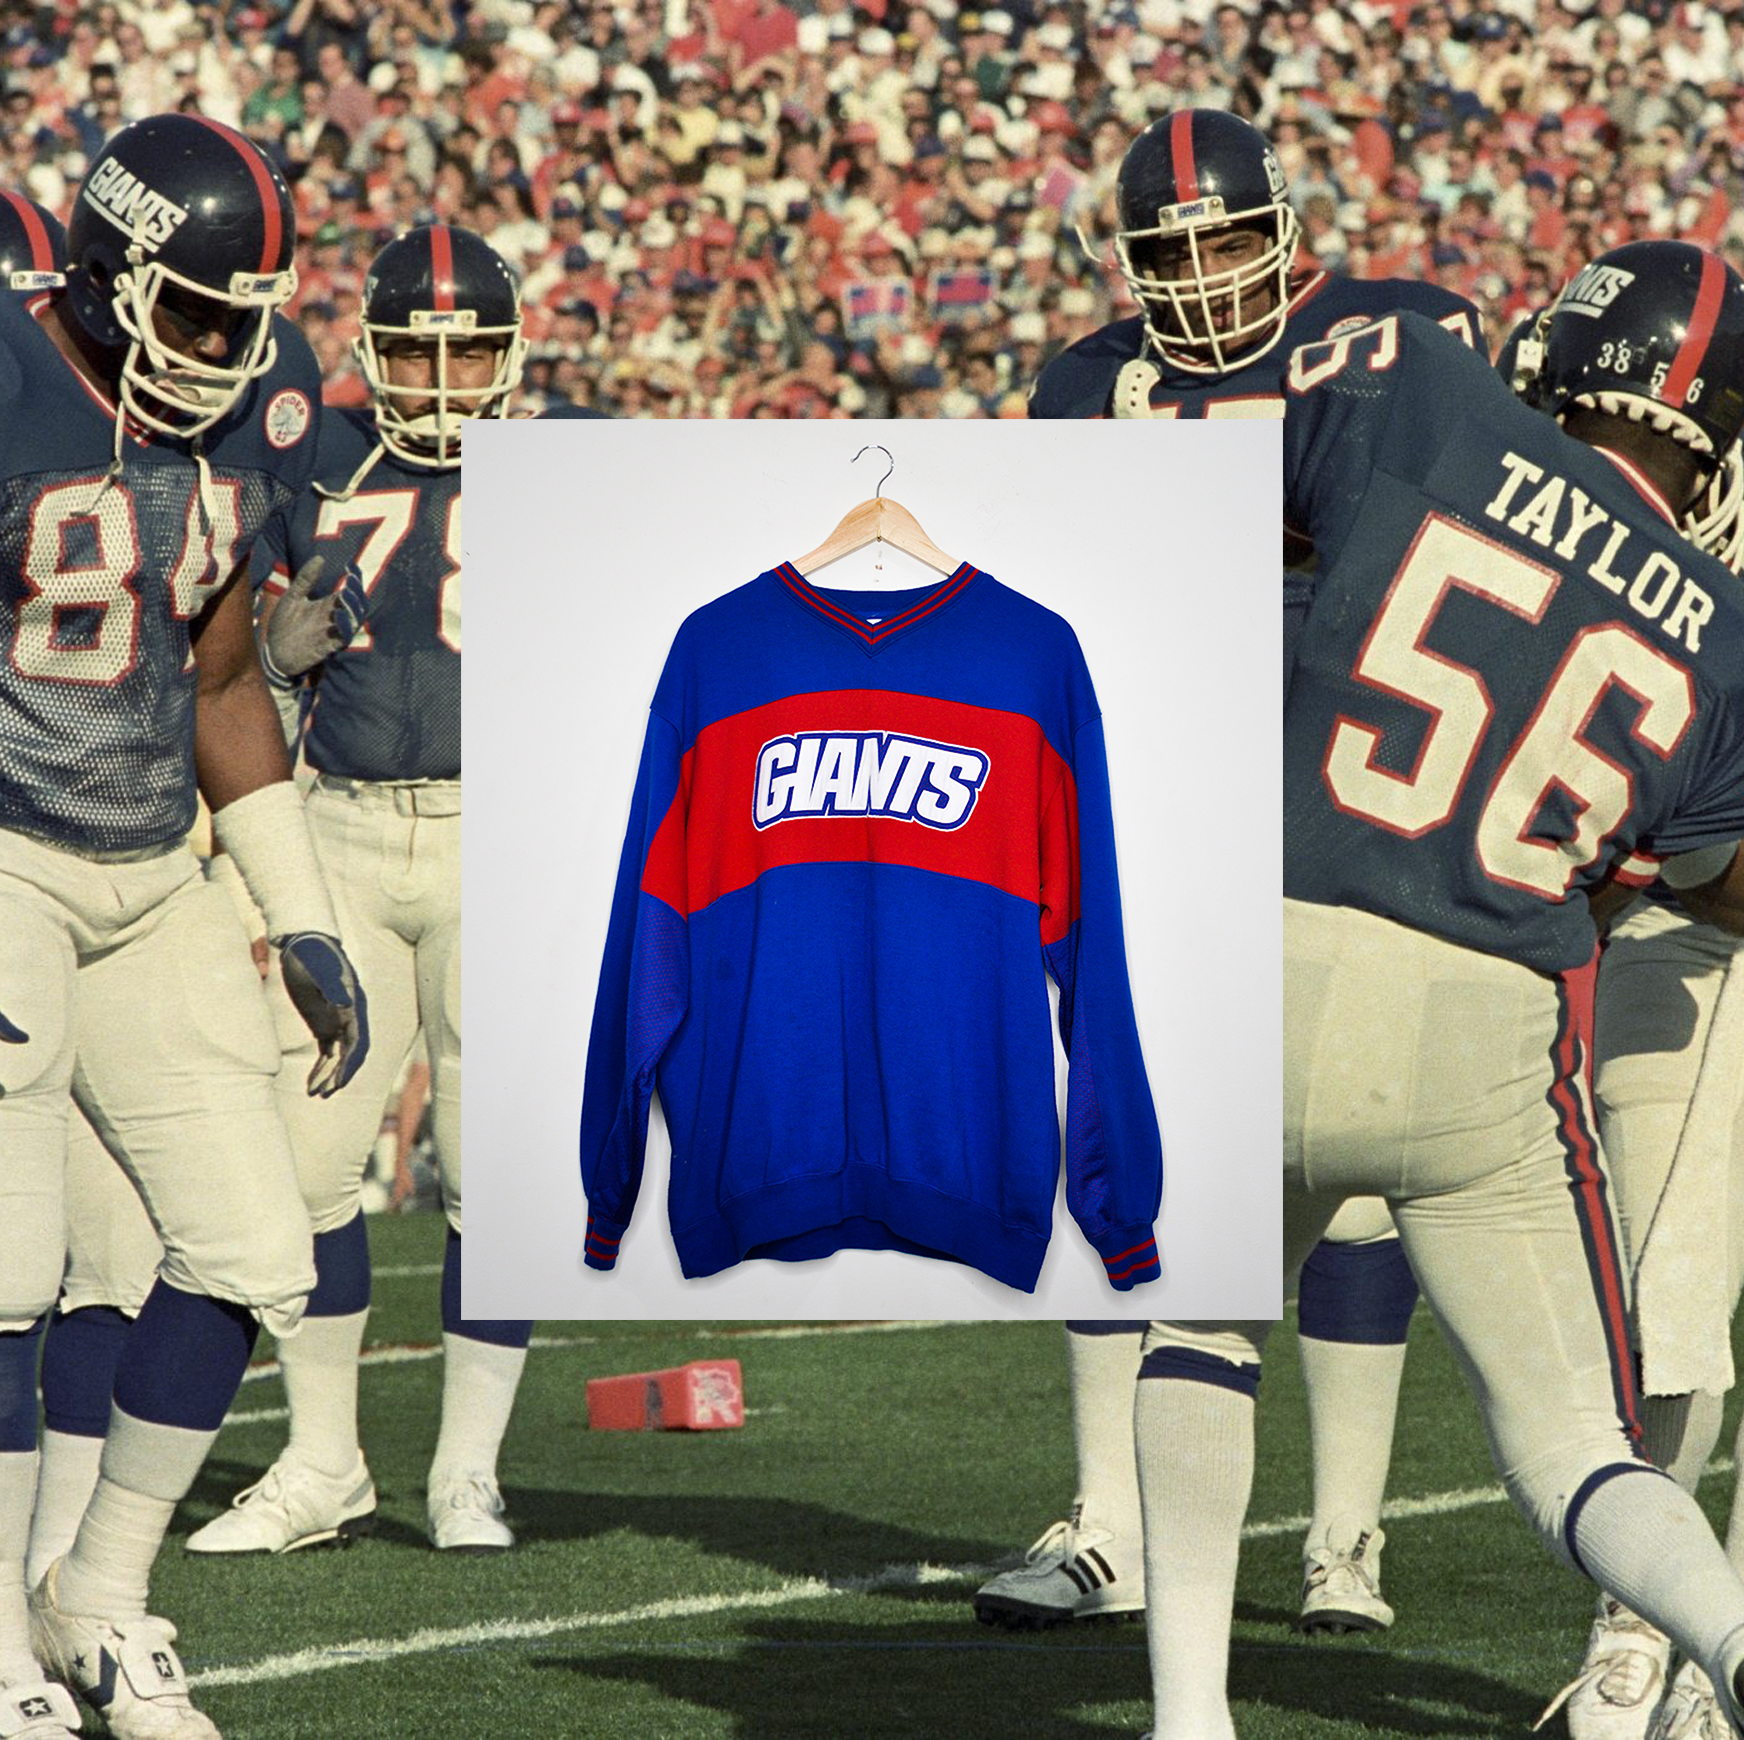 NEW YORK GIANTS EMBROIDERED SPELLOUT CREWNECK